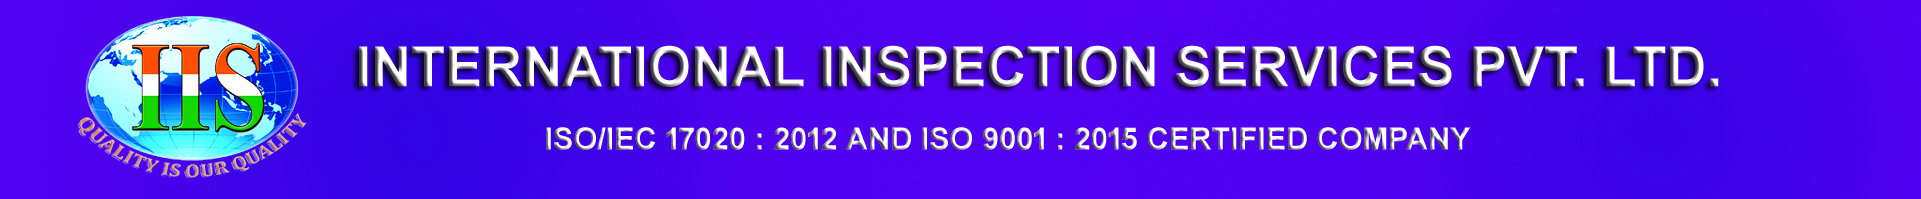 Third Party Inspection Services